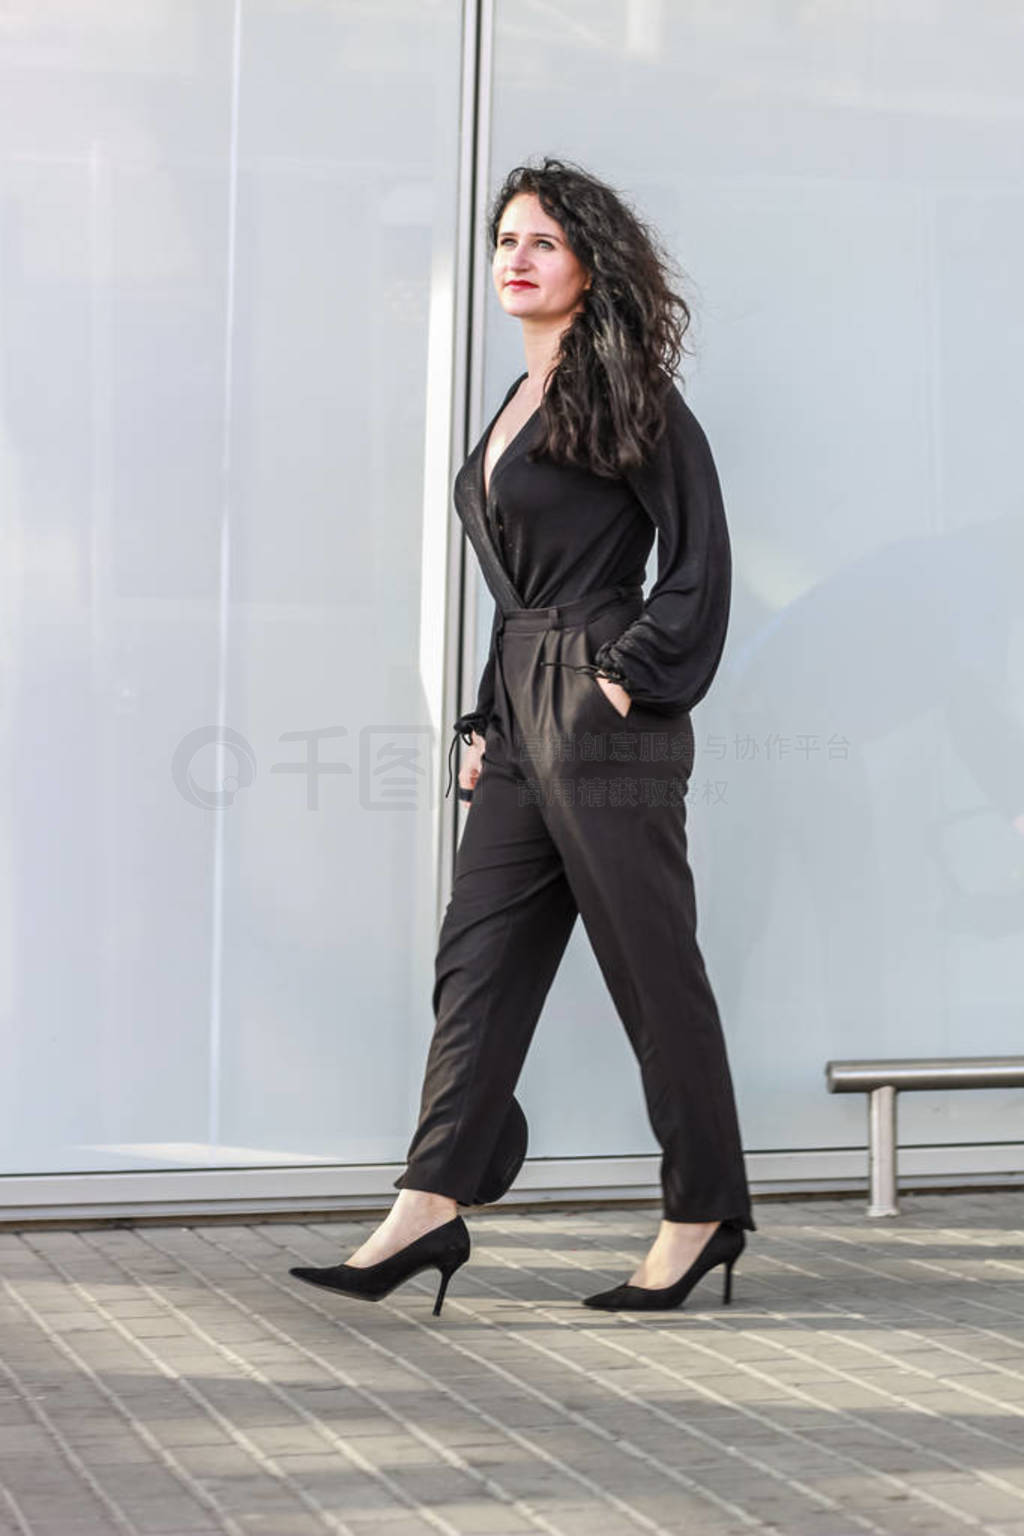 Black-haired girl. Stylish business woman. Black overalls. Suit